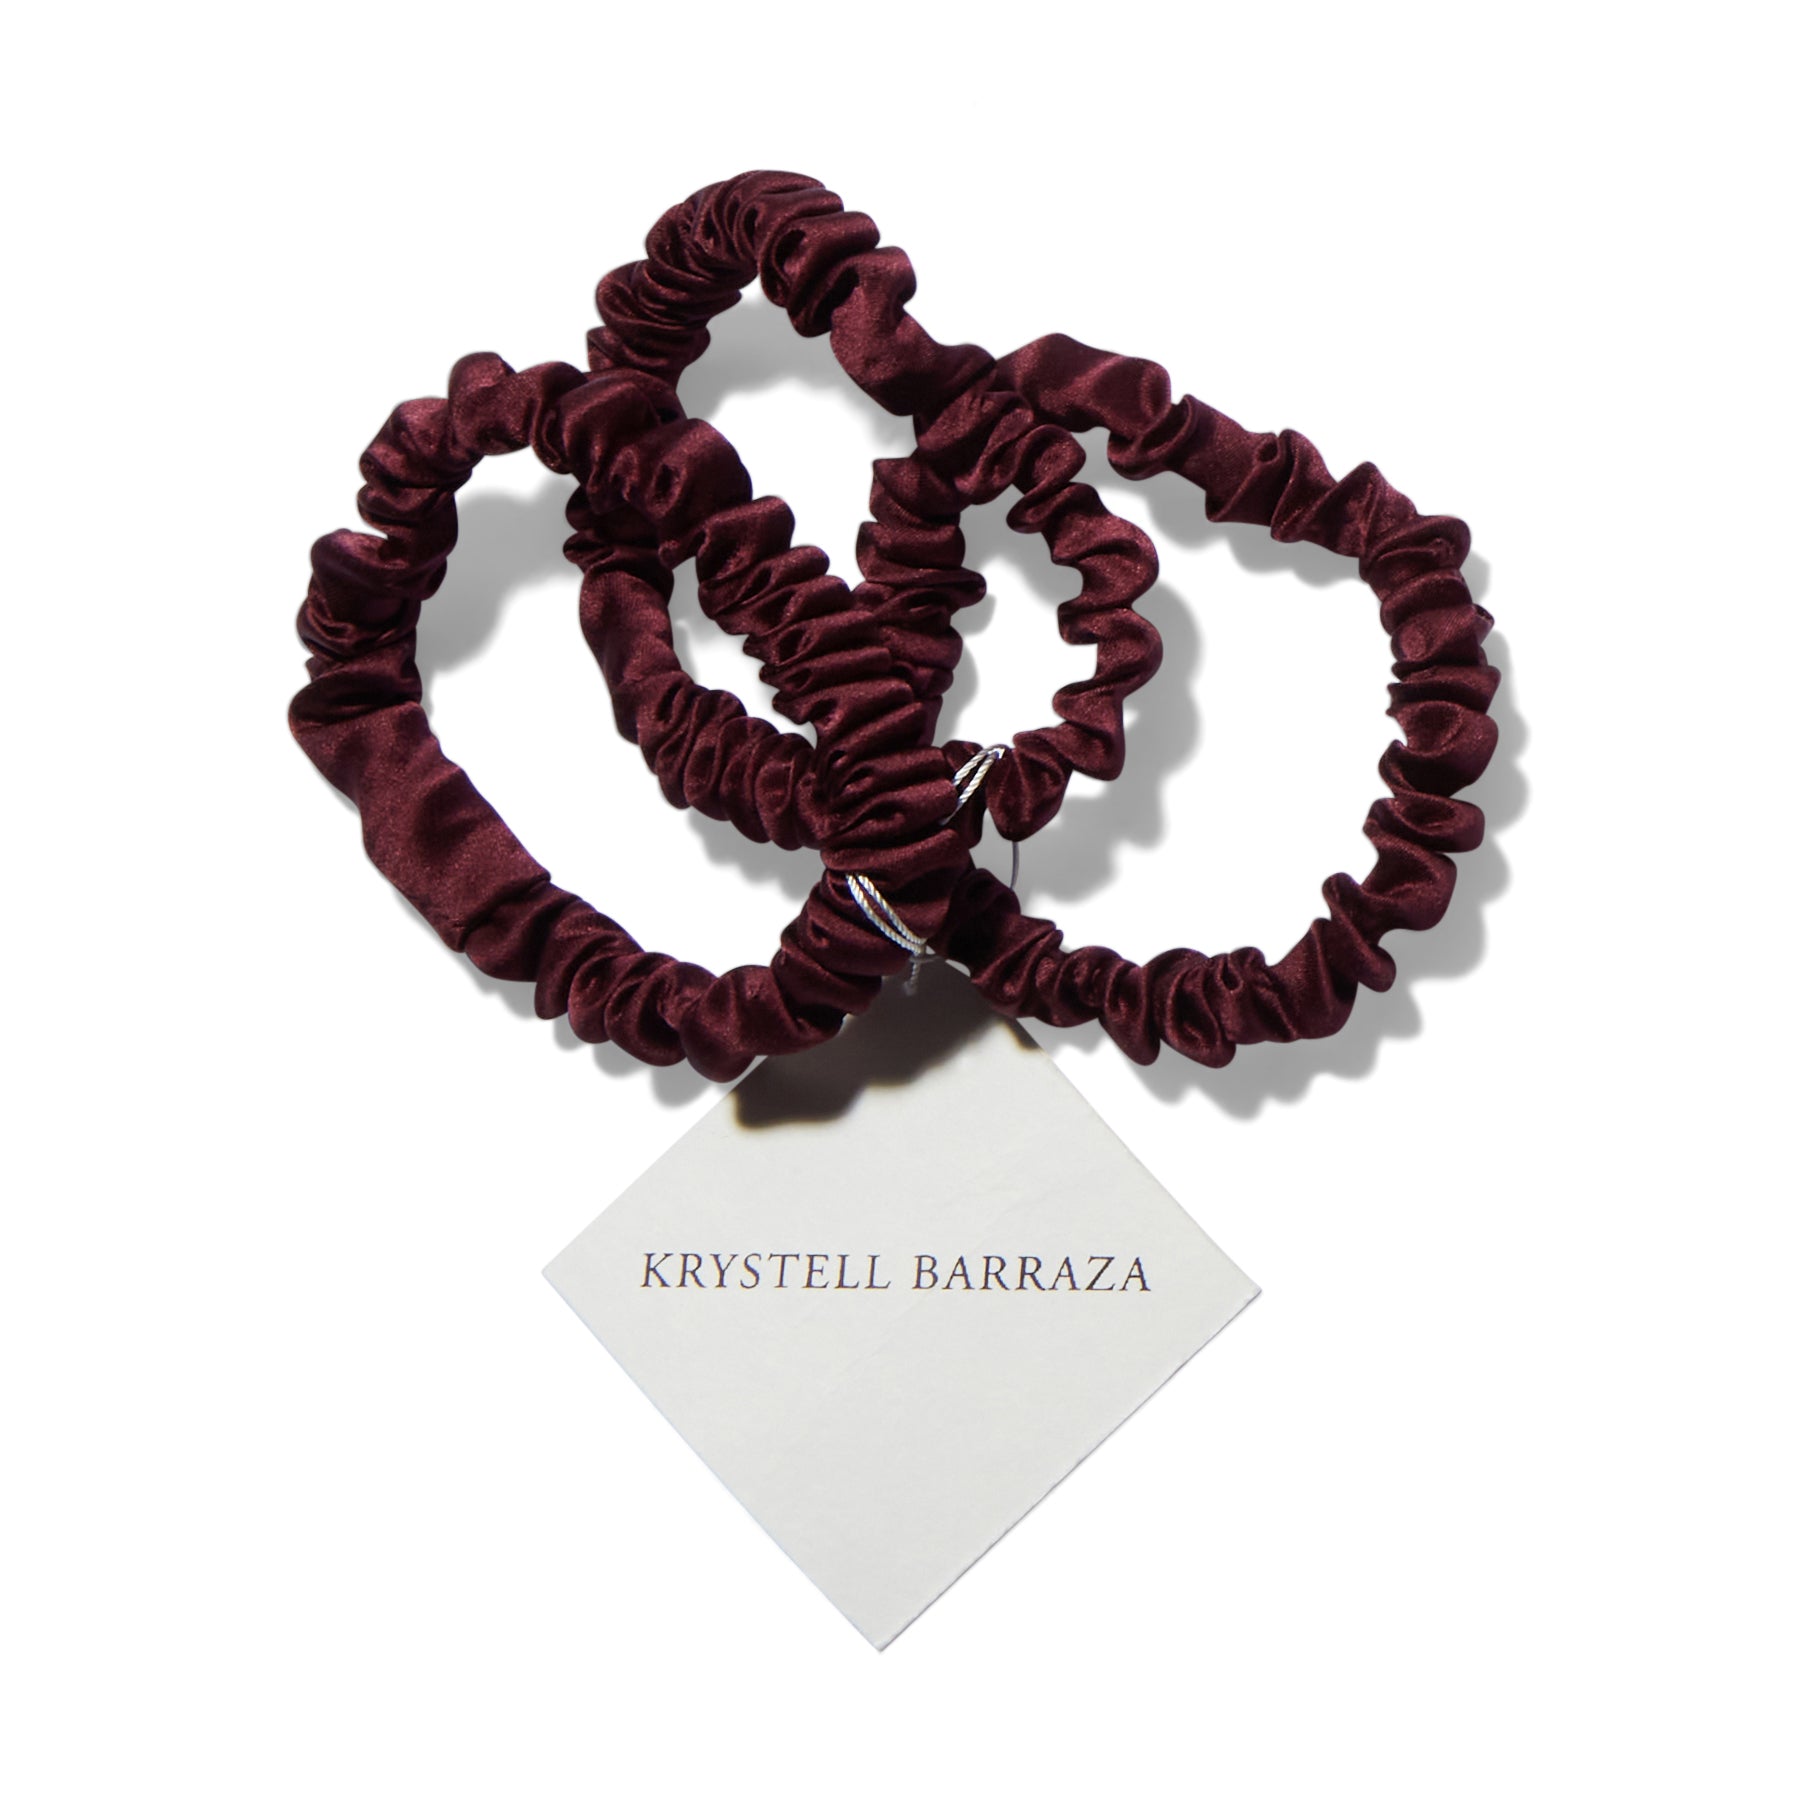 Three 6 Krystell Barraza silk hair ties in Plum with the logo tag attached. 